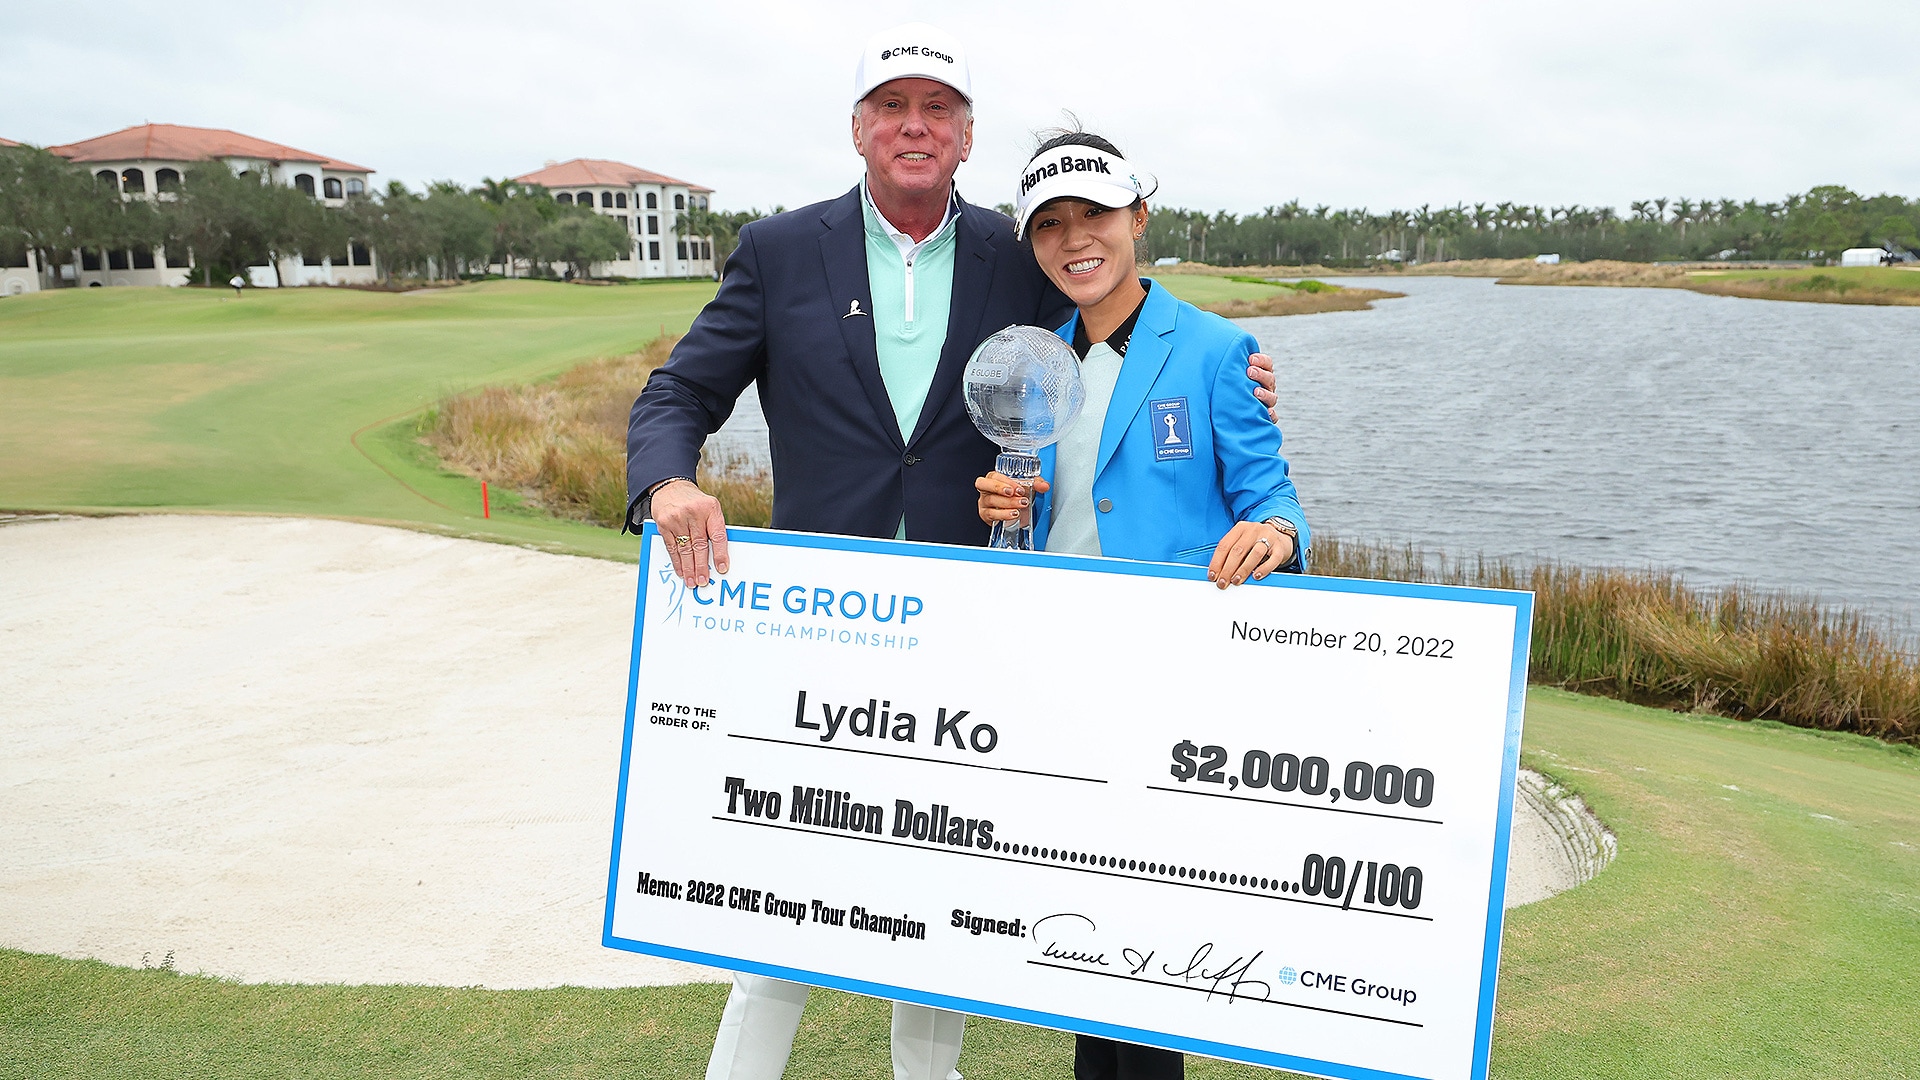 CME Group Tour Championship payout: $2 million winner’s check goes to Lydia Ko